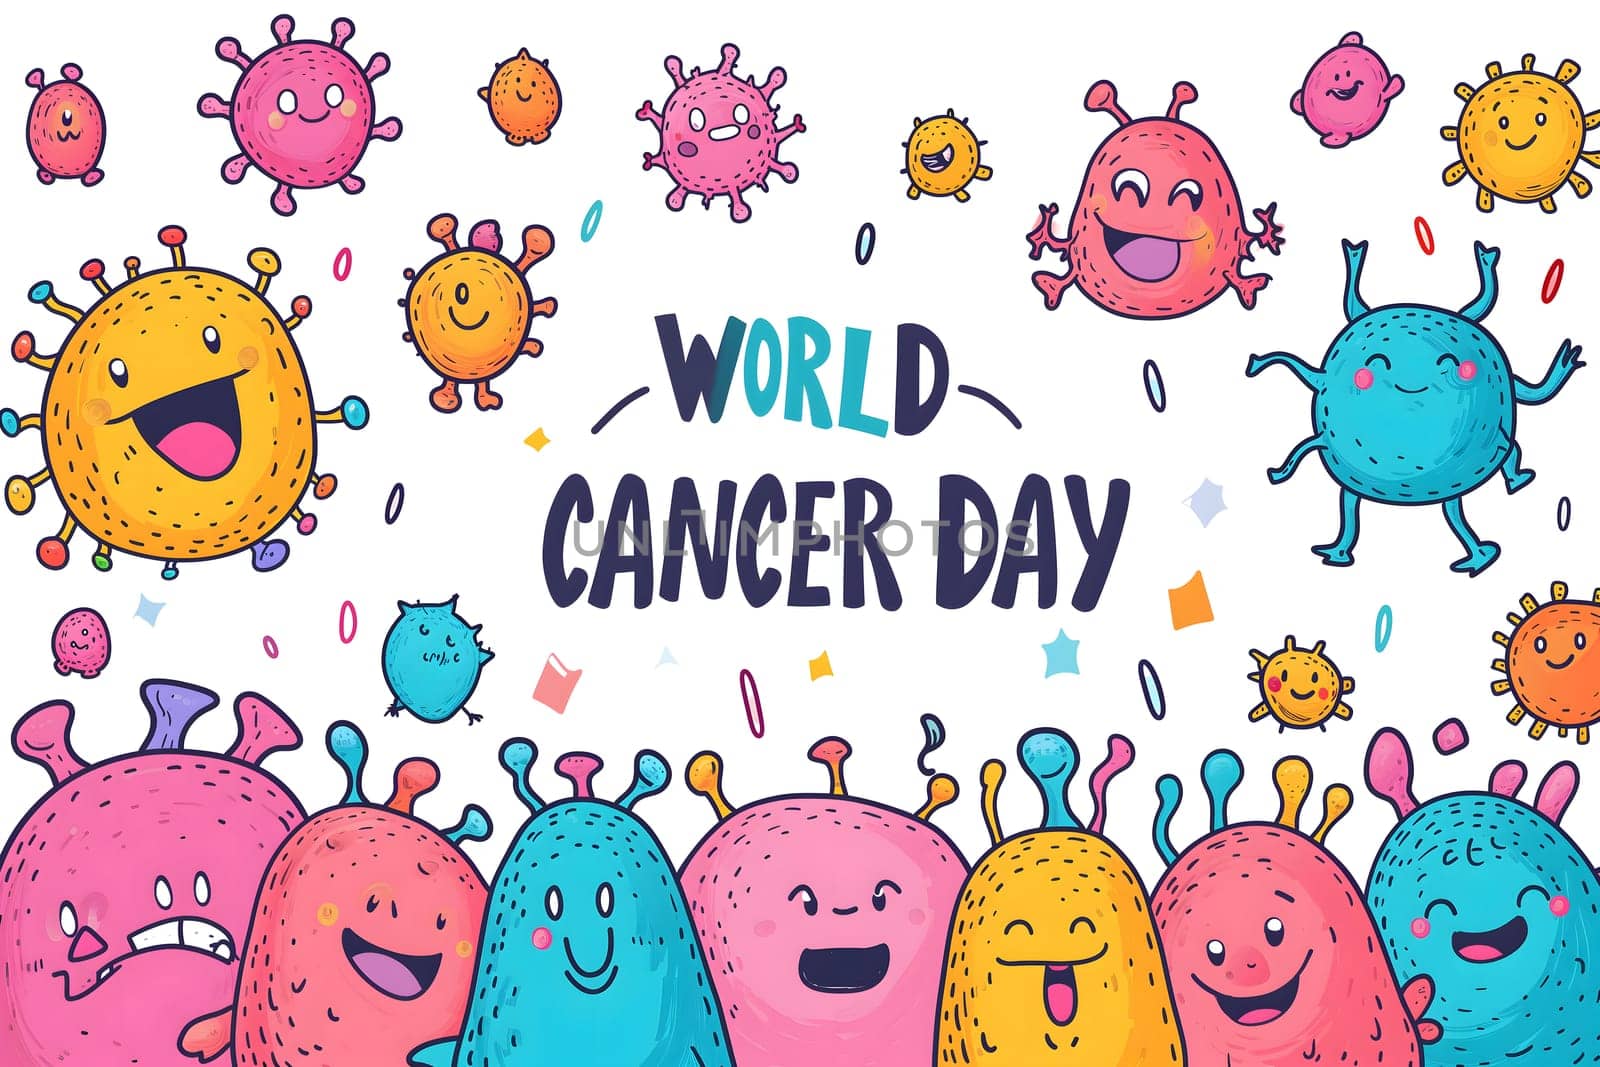 Simple cartoon world cancer day background with the inscription on it, surrounded with colorful happy tumors. Neural network generated image. Not based on any actual scene or pattern.